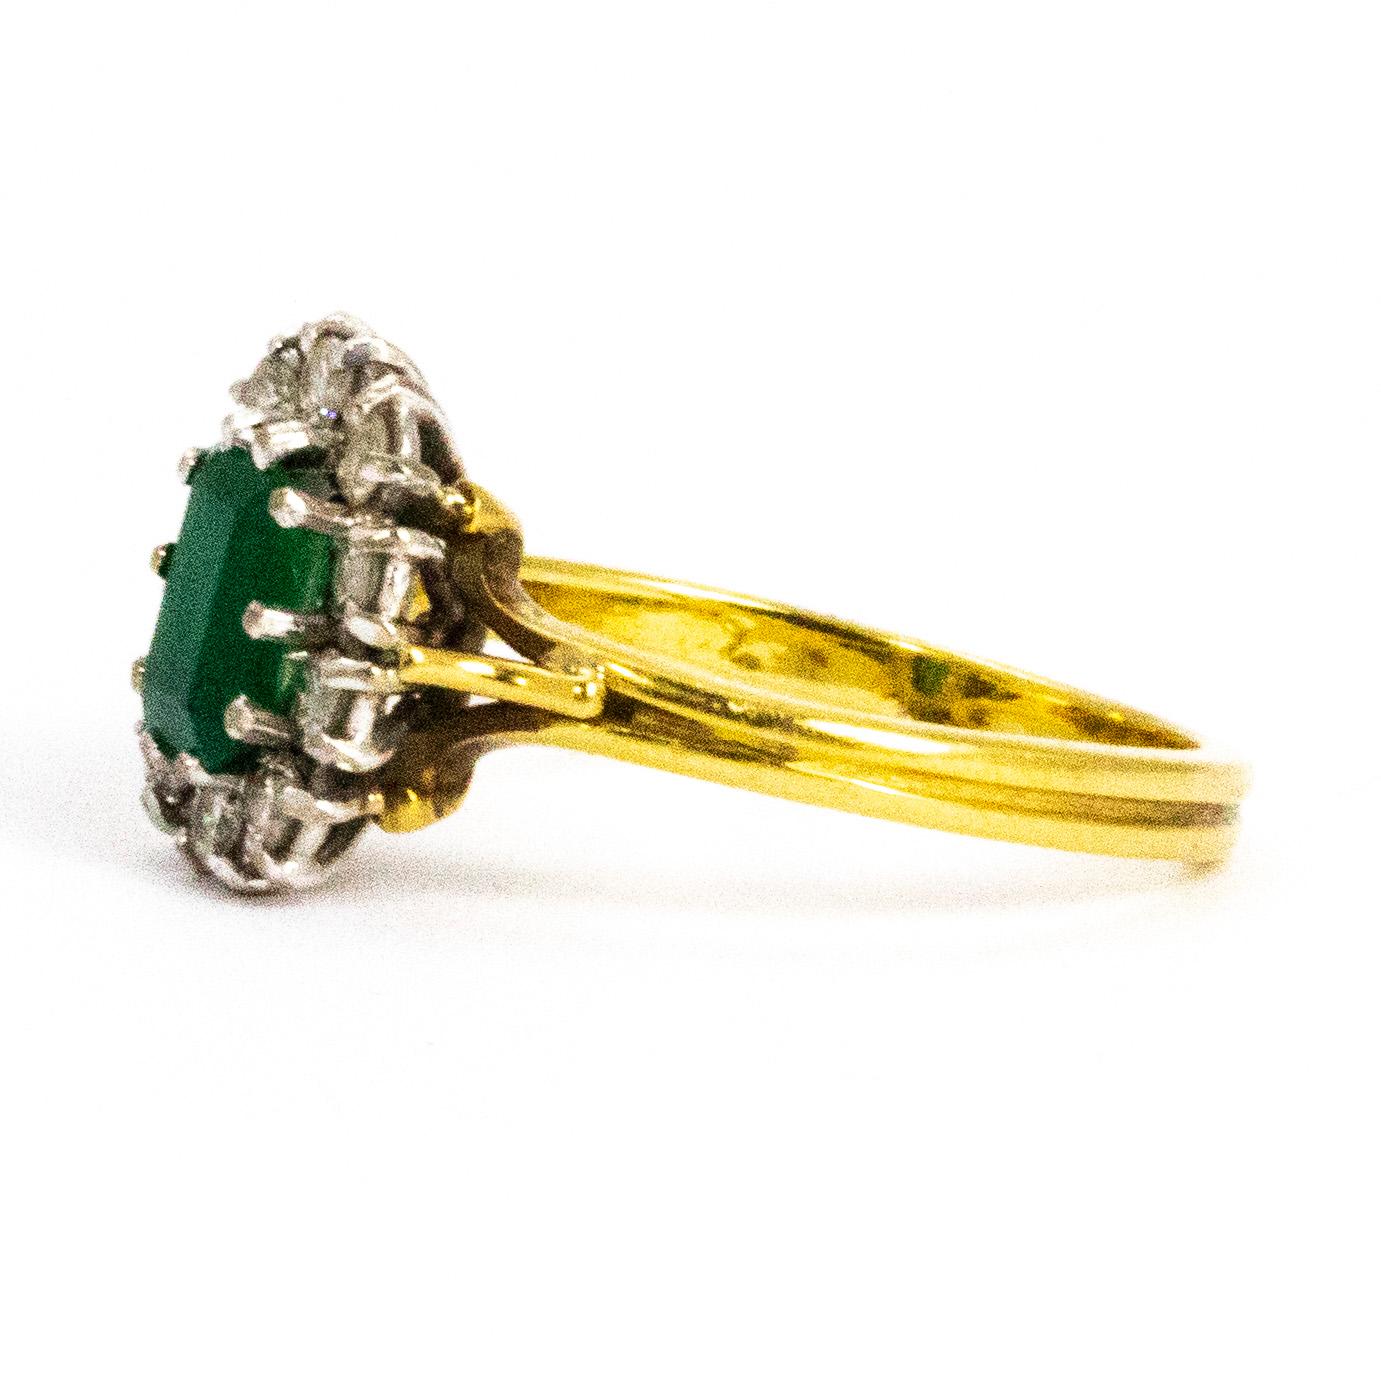 This classic cluster ring has a gorgeous deep green emerald cut emerald as the main attraction. Around the 50pt emerald sits a halo of gorgeous sparkling brilliant cut  diamonds measuring a total of 45 pts. All the stones are set in platinum. 

Ring